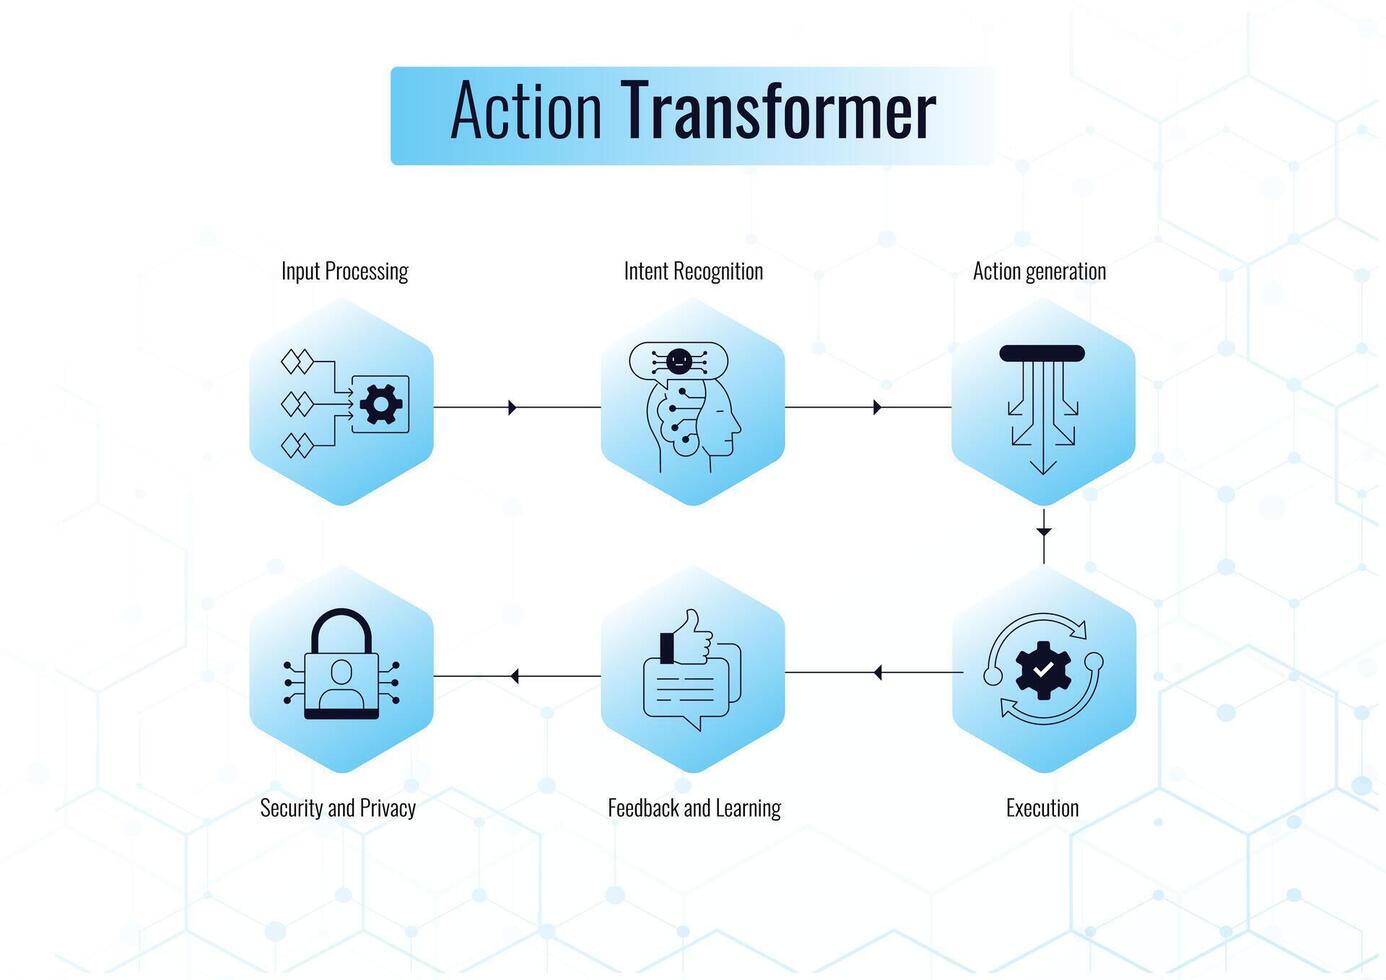 Optimising Action Transformers. A Visual Guide to Key Stages. Illustrating Input Processing, Intent Recognition, Action generation, Execution, Feedback and Learning. vector